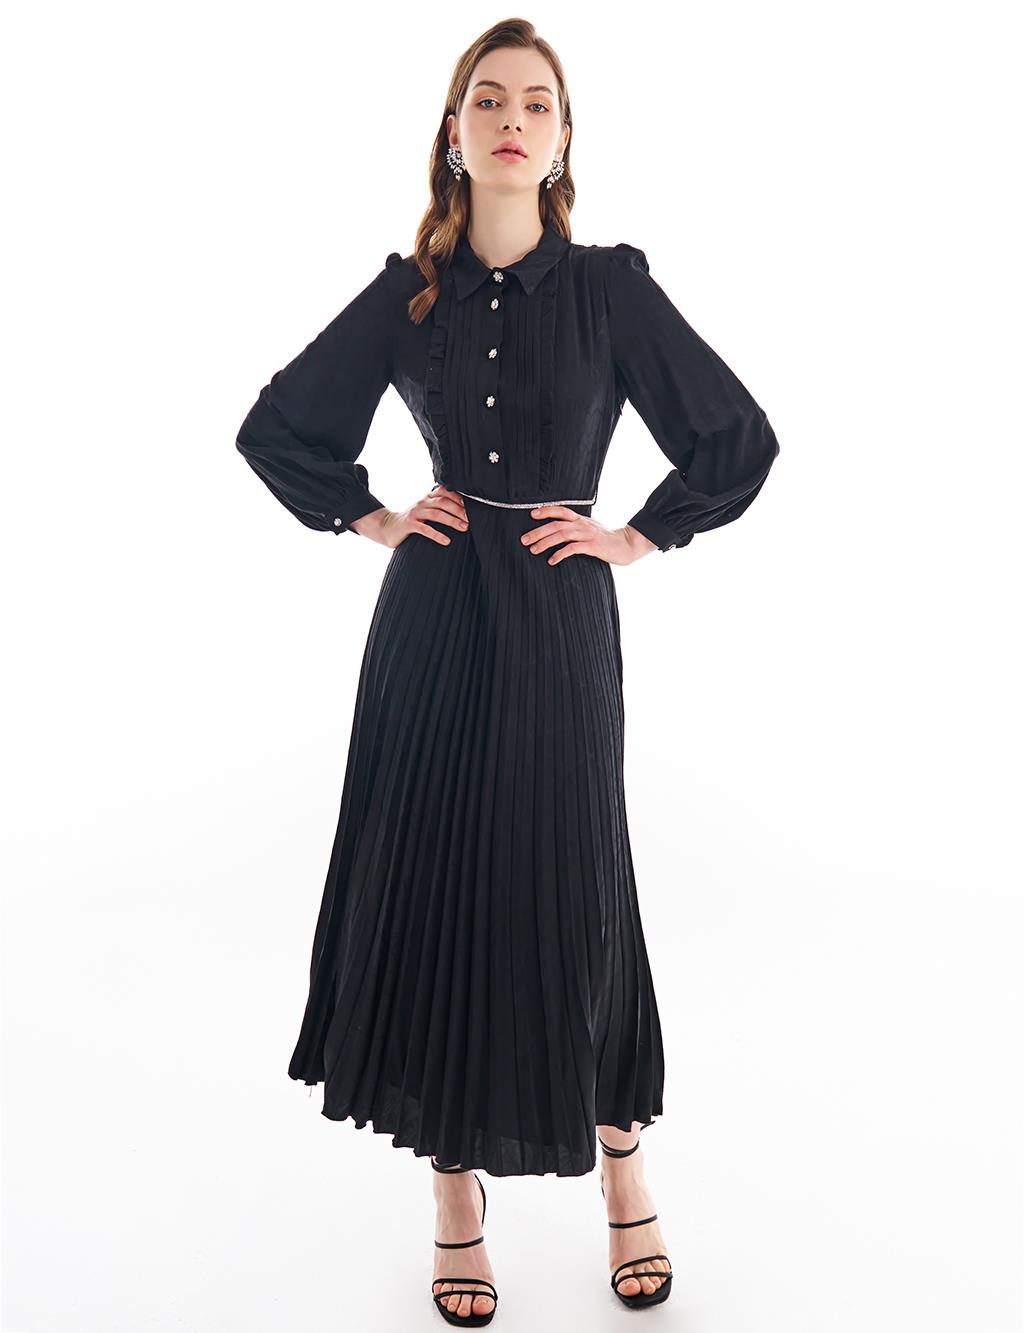 Belted Pleated Dress Black